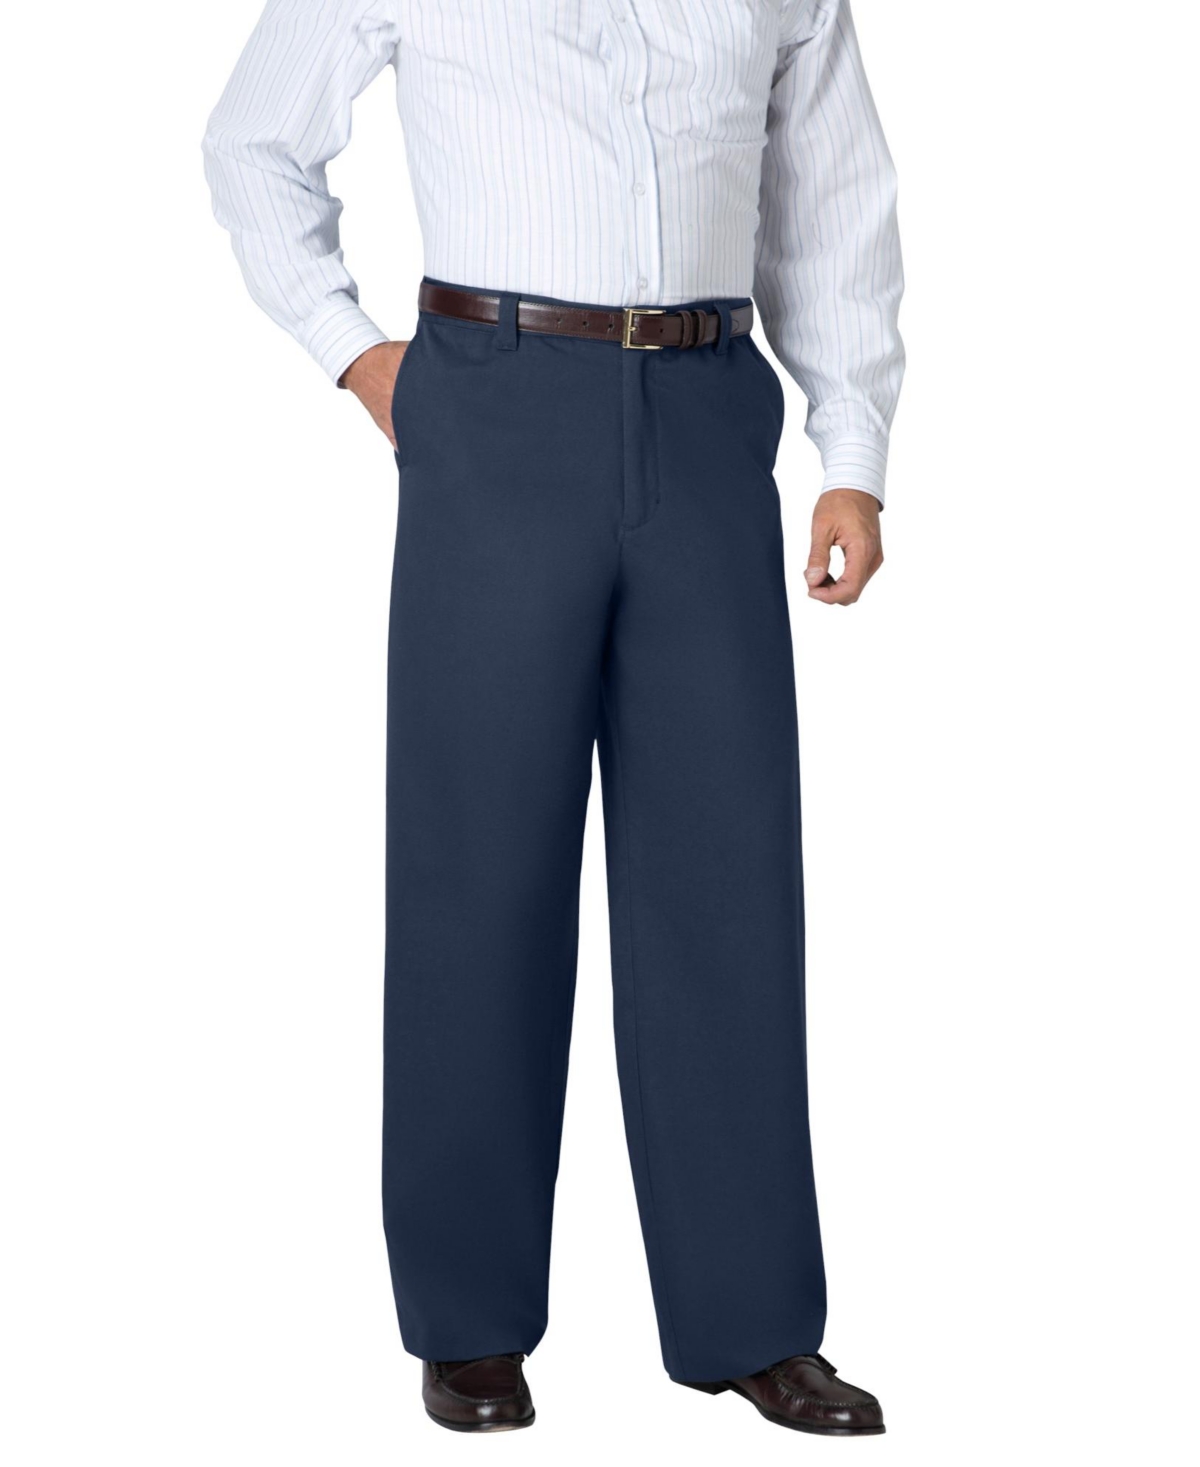 Big & Tall Wrinkle-Free Pants With Expandable Waist, Wide Leg - Carbon